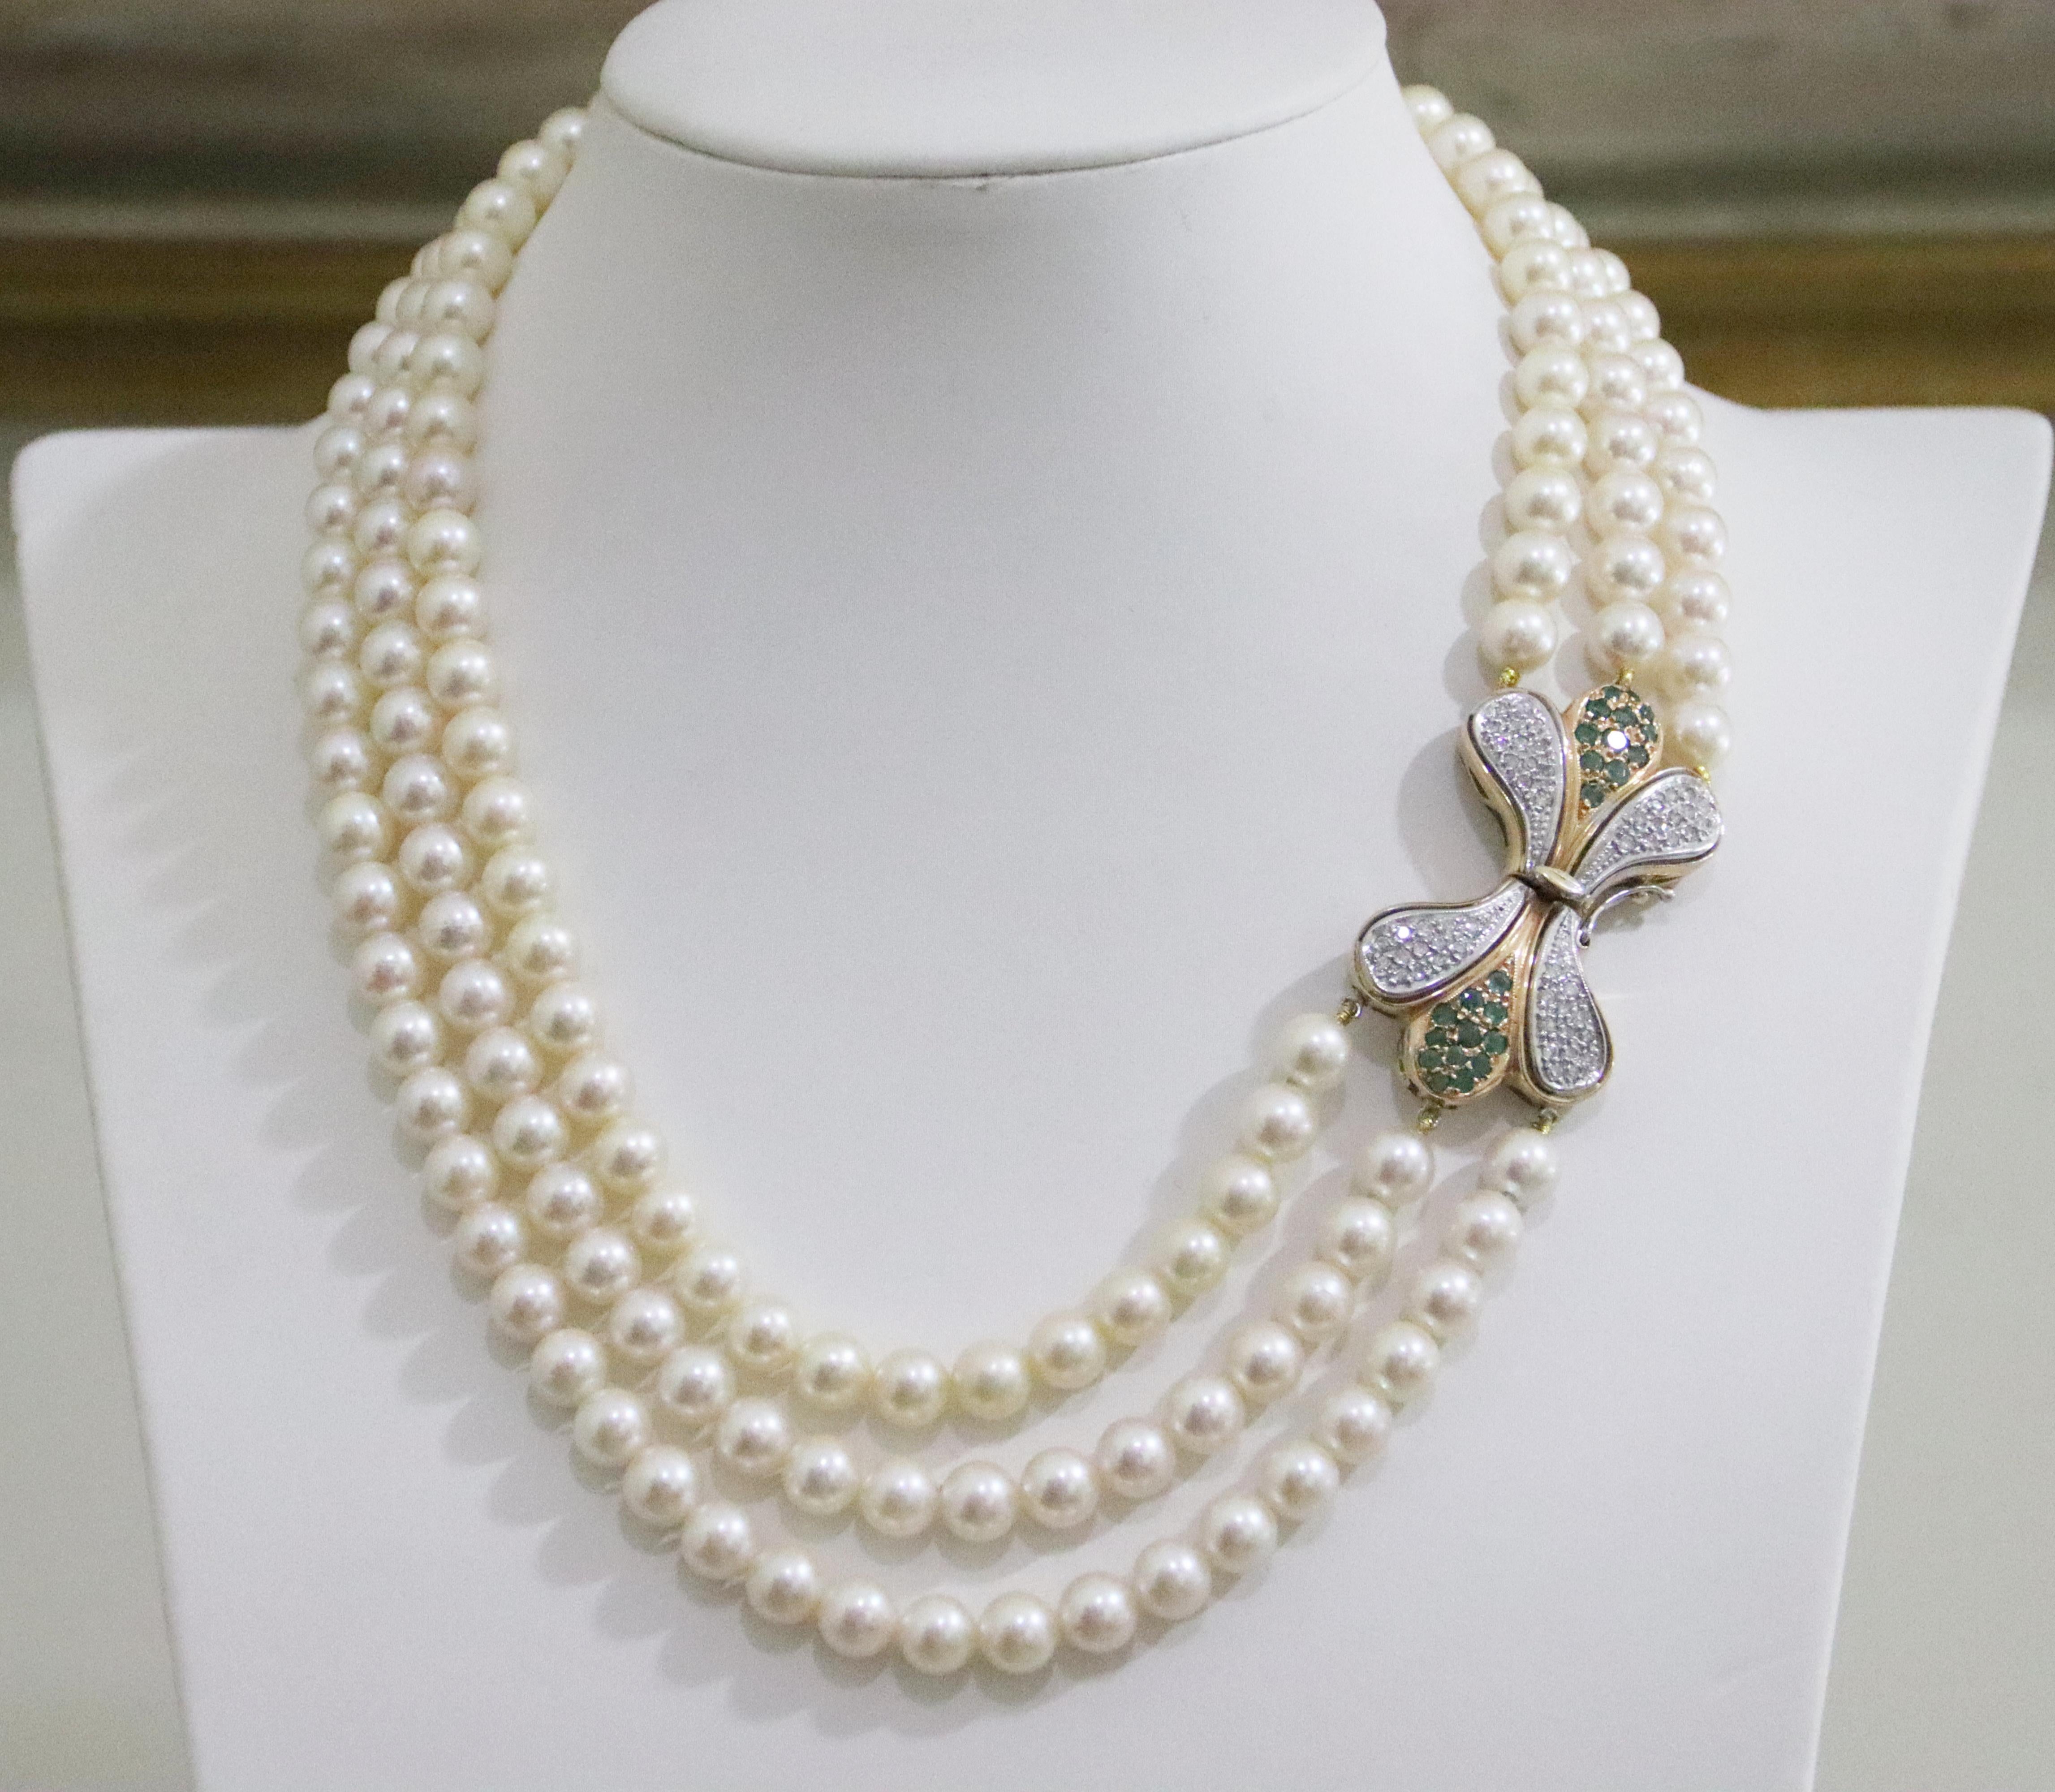 Artisan Pearls Diamonds Emeralds 18 Karat White And Yellow Gold Multi-Strand Necklace For Sale